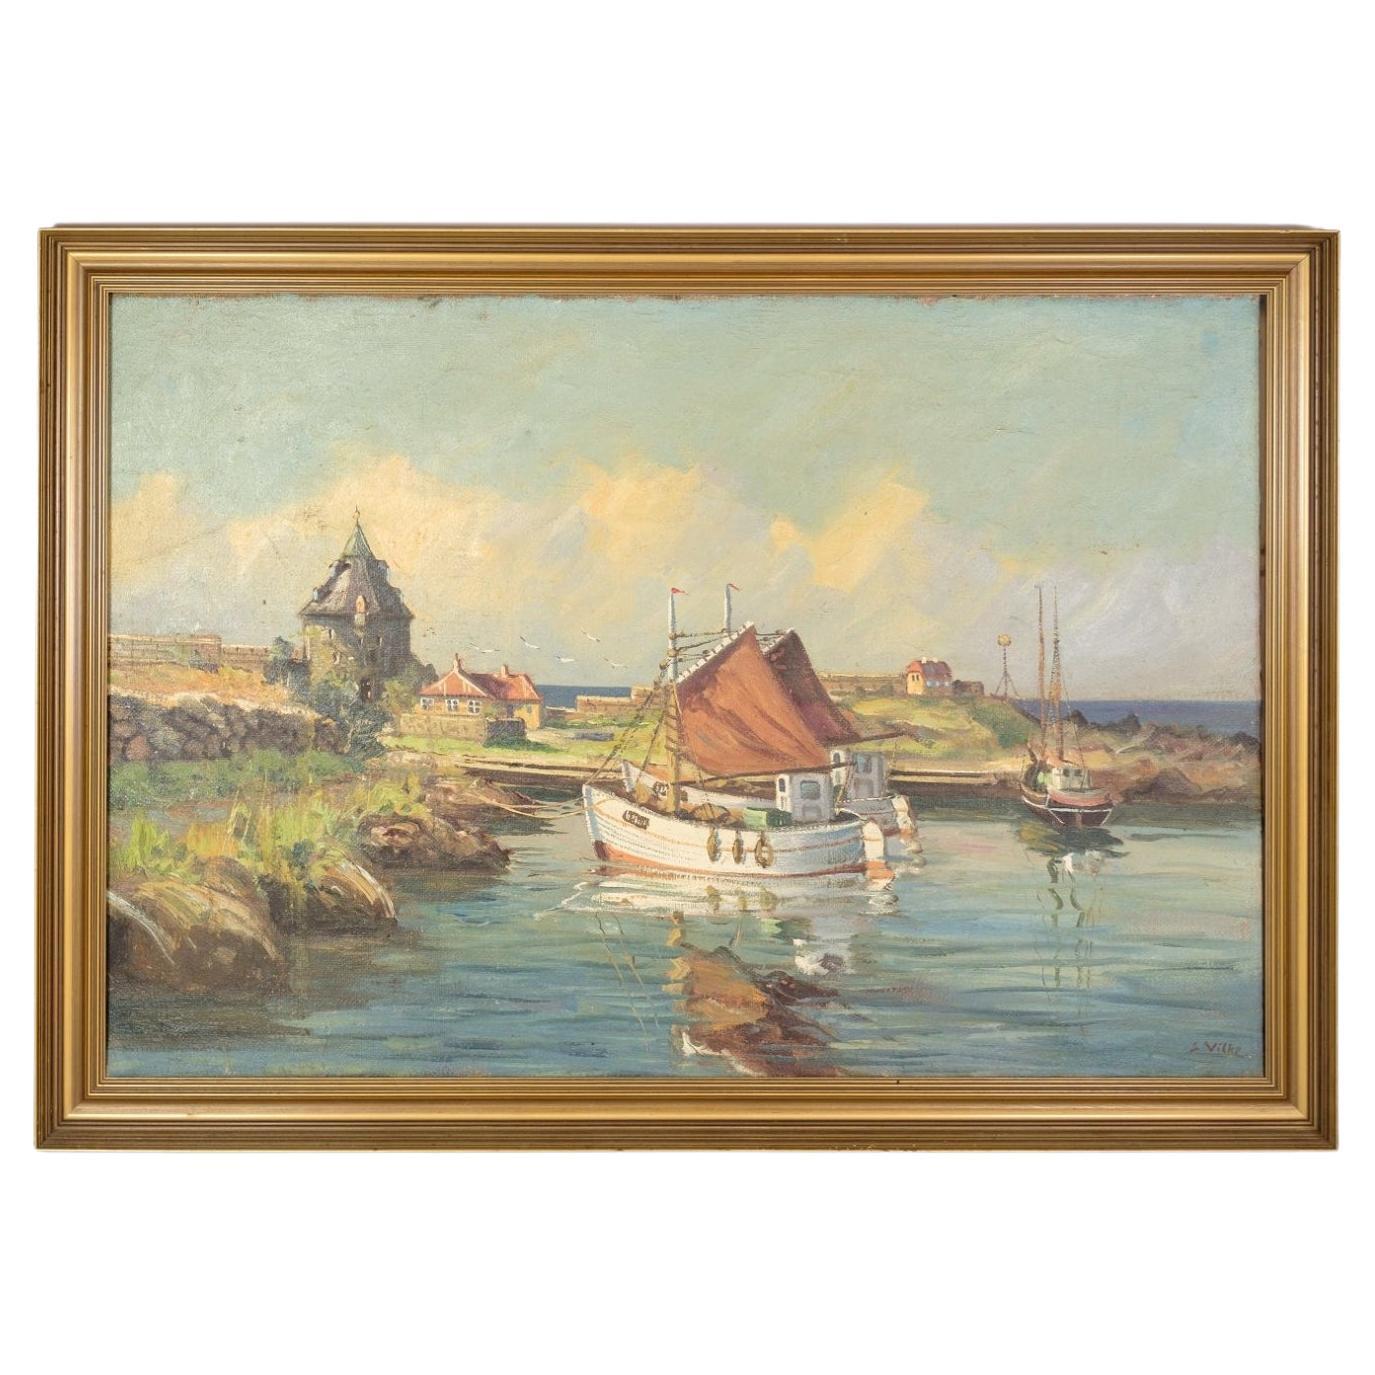 Large Oil Painting On Canvas With Motif Of Fishing Boats Near Shore From 1930s